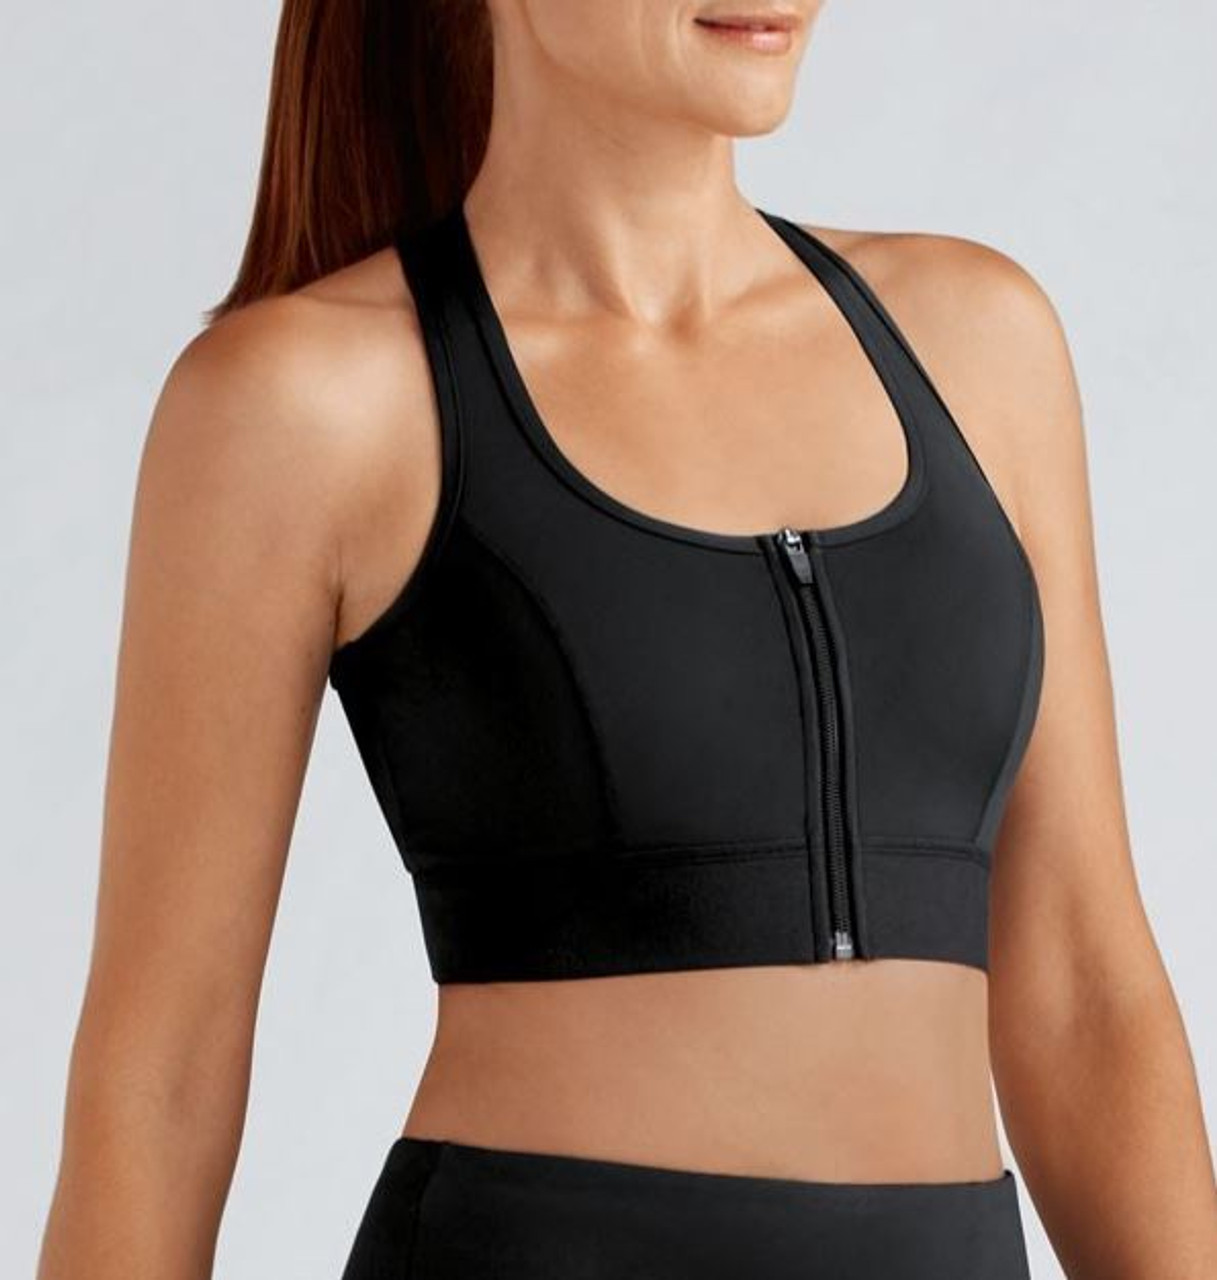 Amoena Mastectomy Bra- a Front Zipper Sports Bra after Breast Surgery